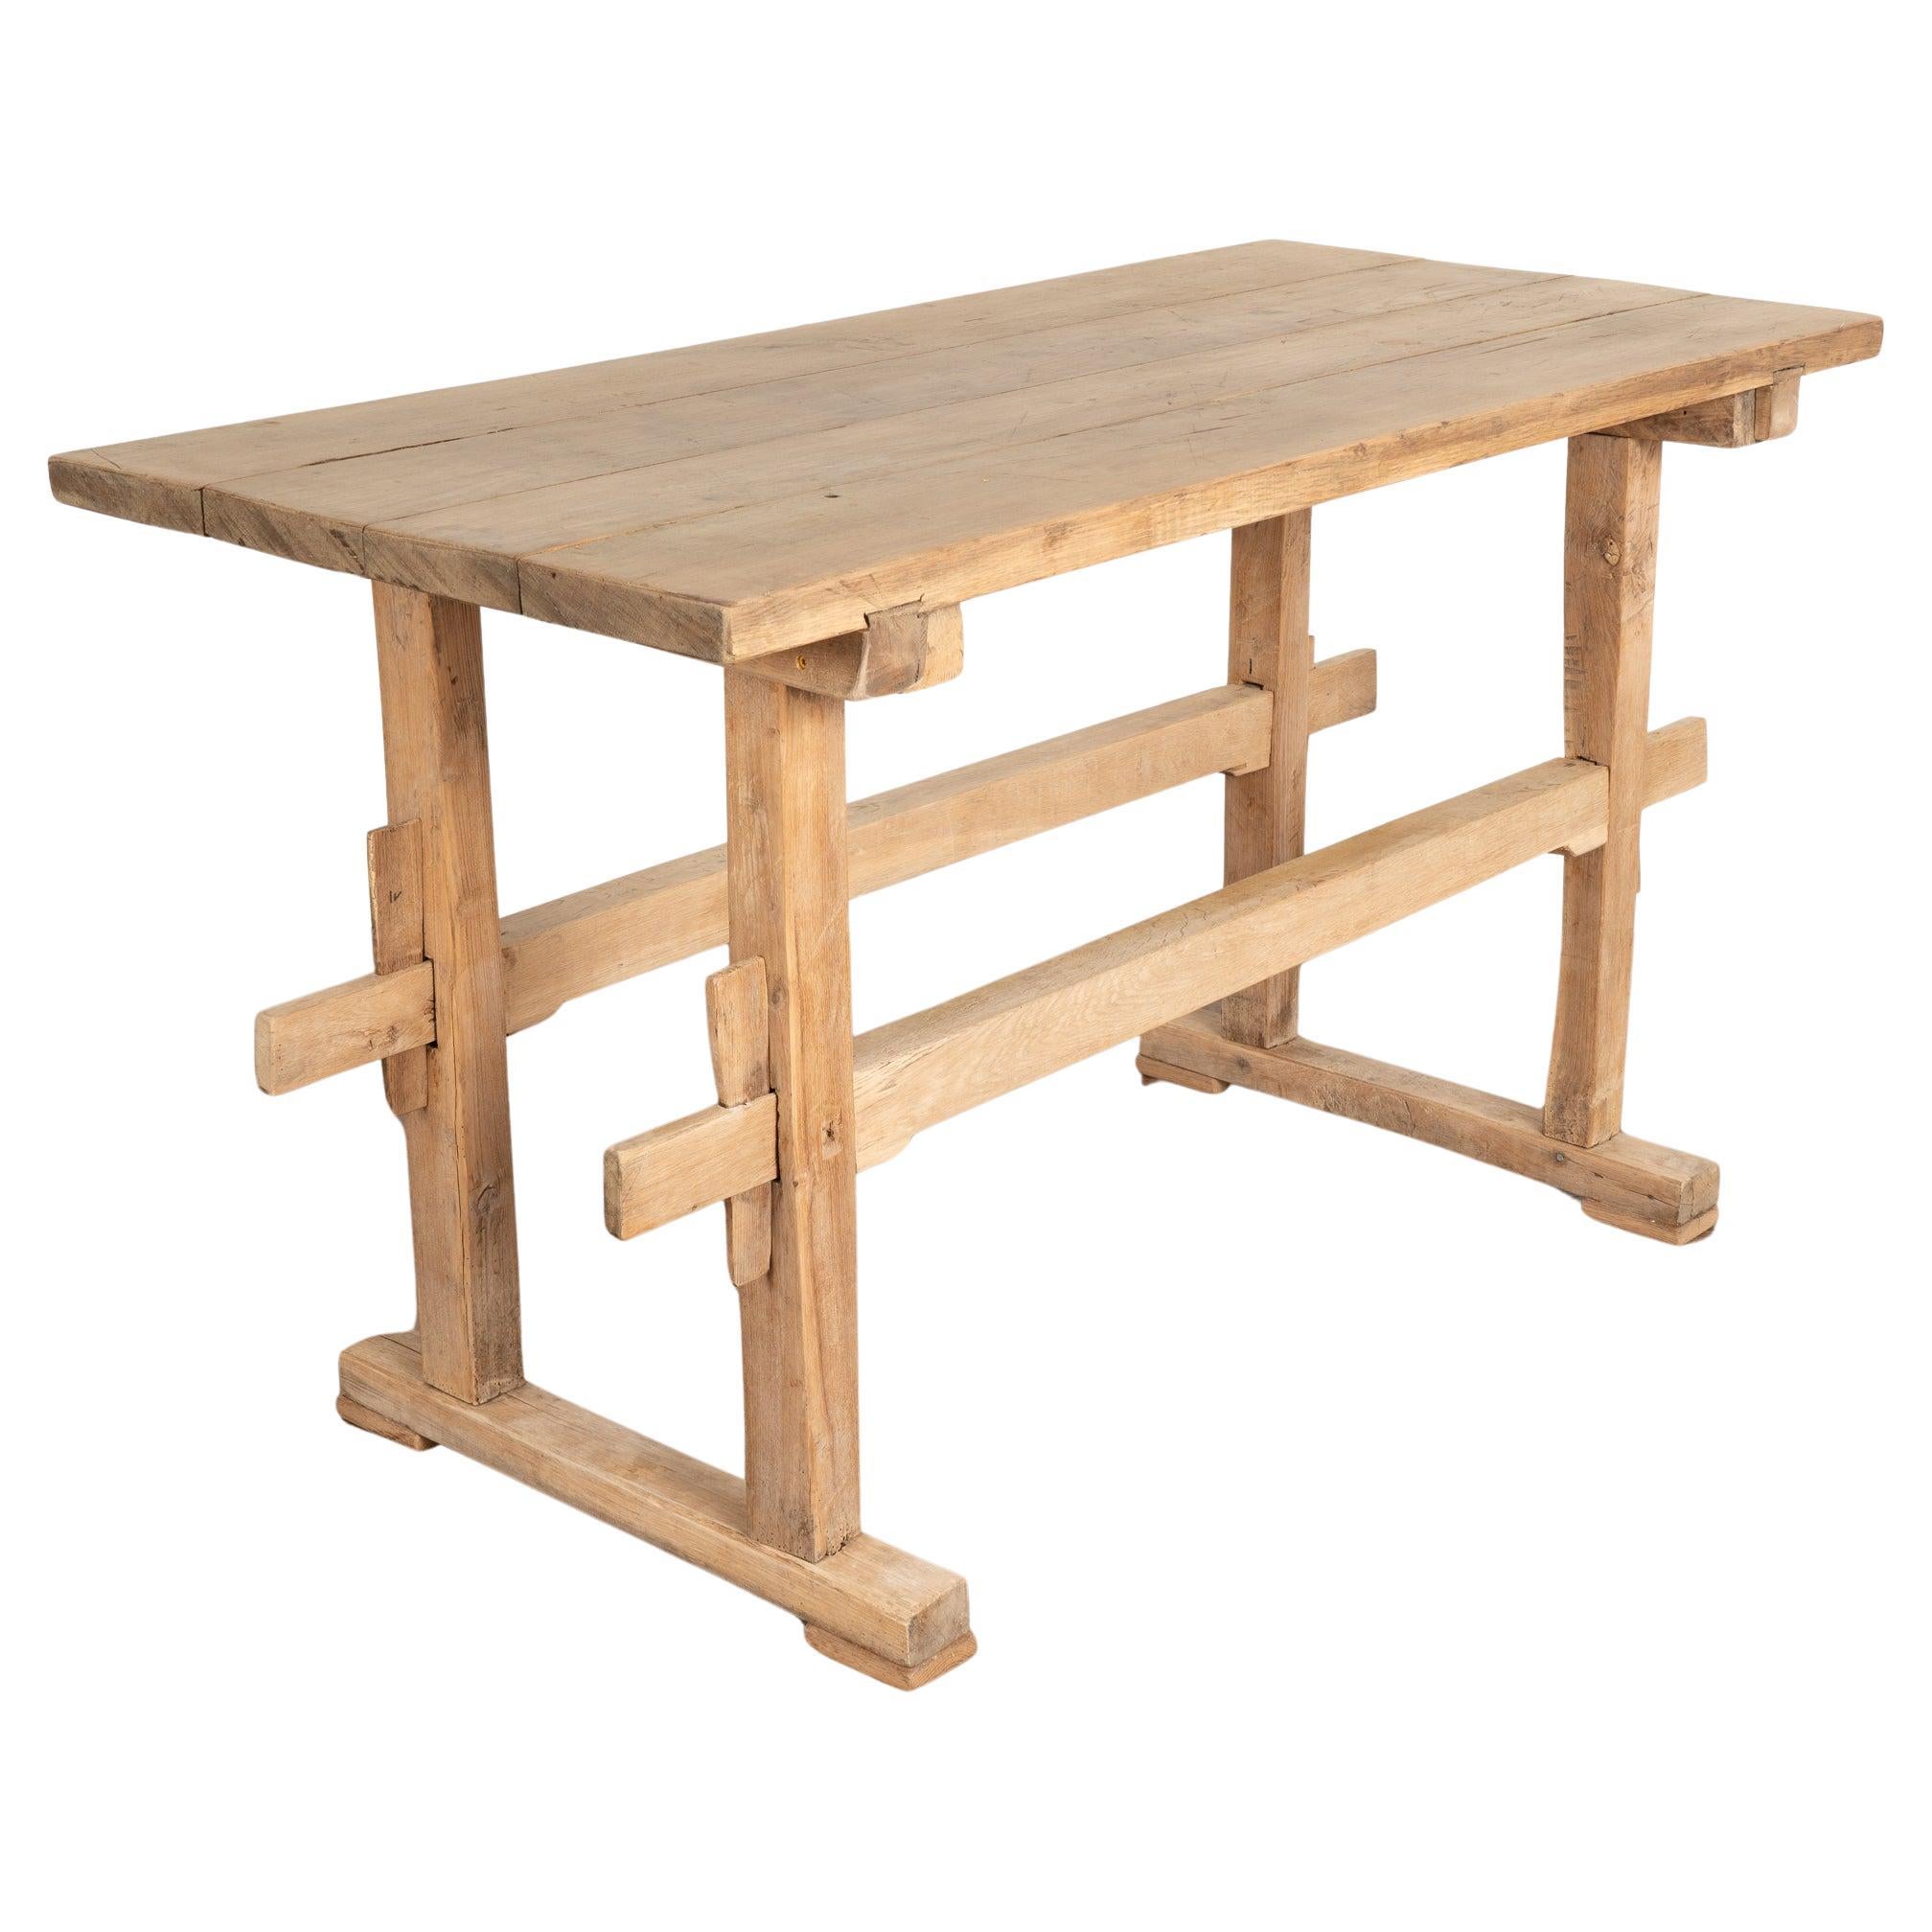 Rustic Trestle Farm Table from Hungary, circa 1880